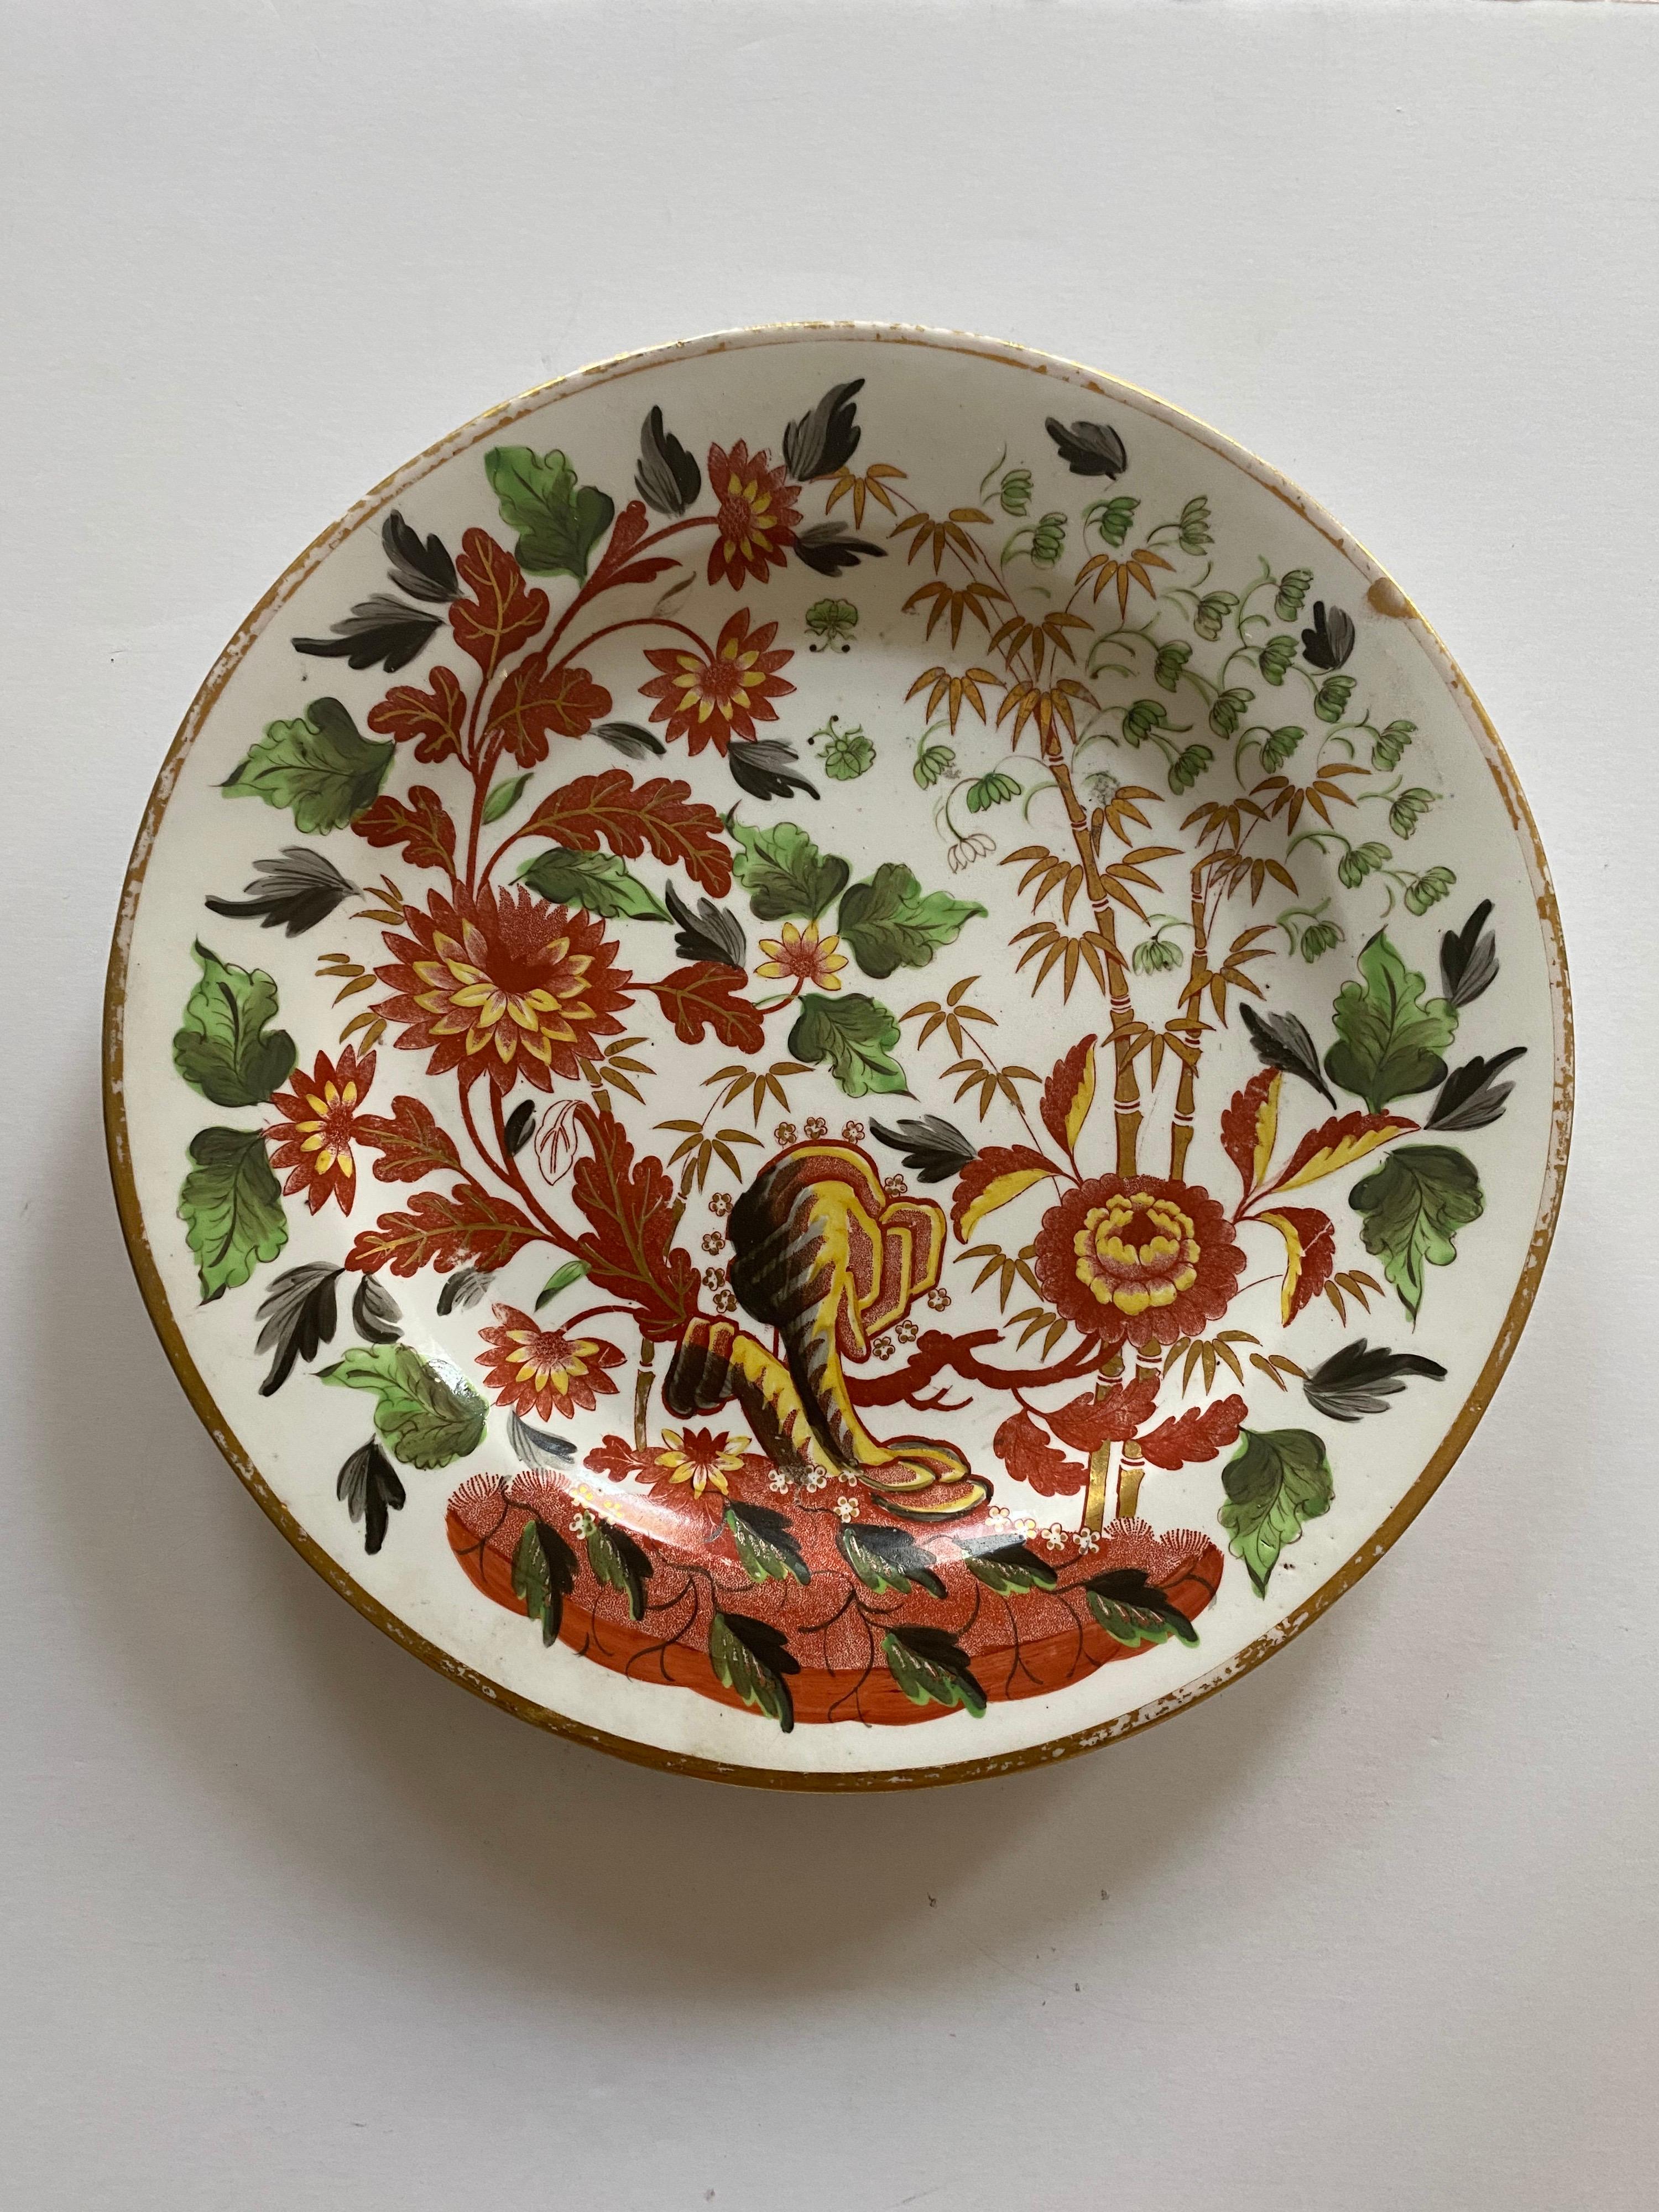 A pair of early Minton porcelain plates, unusually decorated with a red bat-print of Oriental flowers and bamboo branches, overpainted with colourful enamels and complemented by a gilt rim.

Made in England, circa 1806.

Light wear; minor loss to